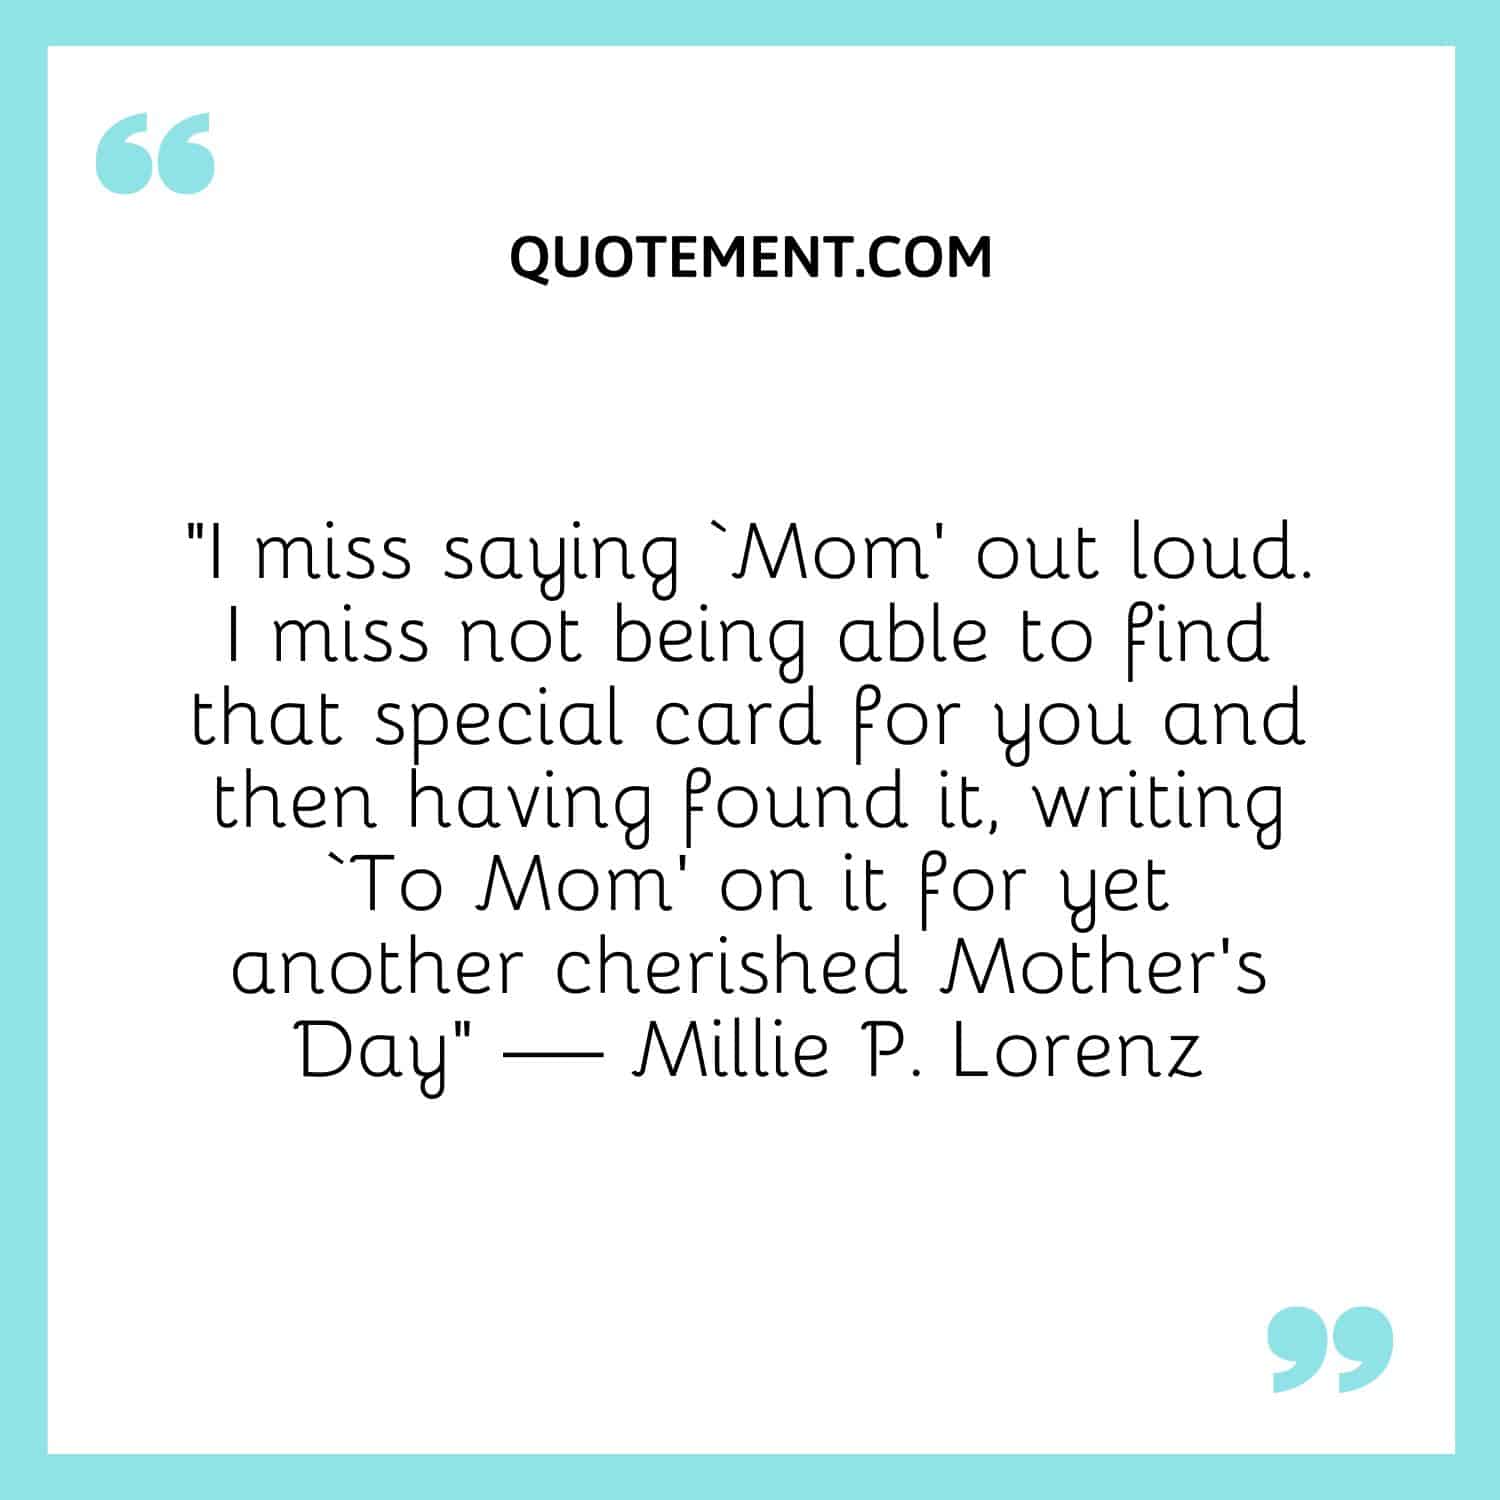 I miss saying ‘Mom’ out loud